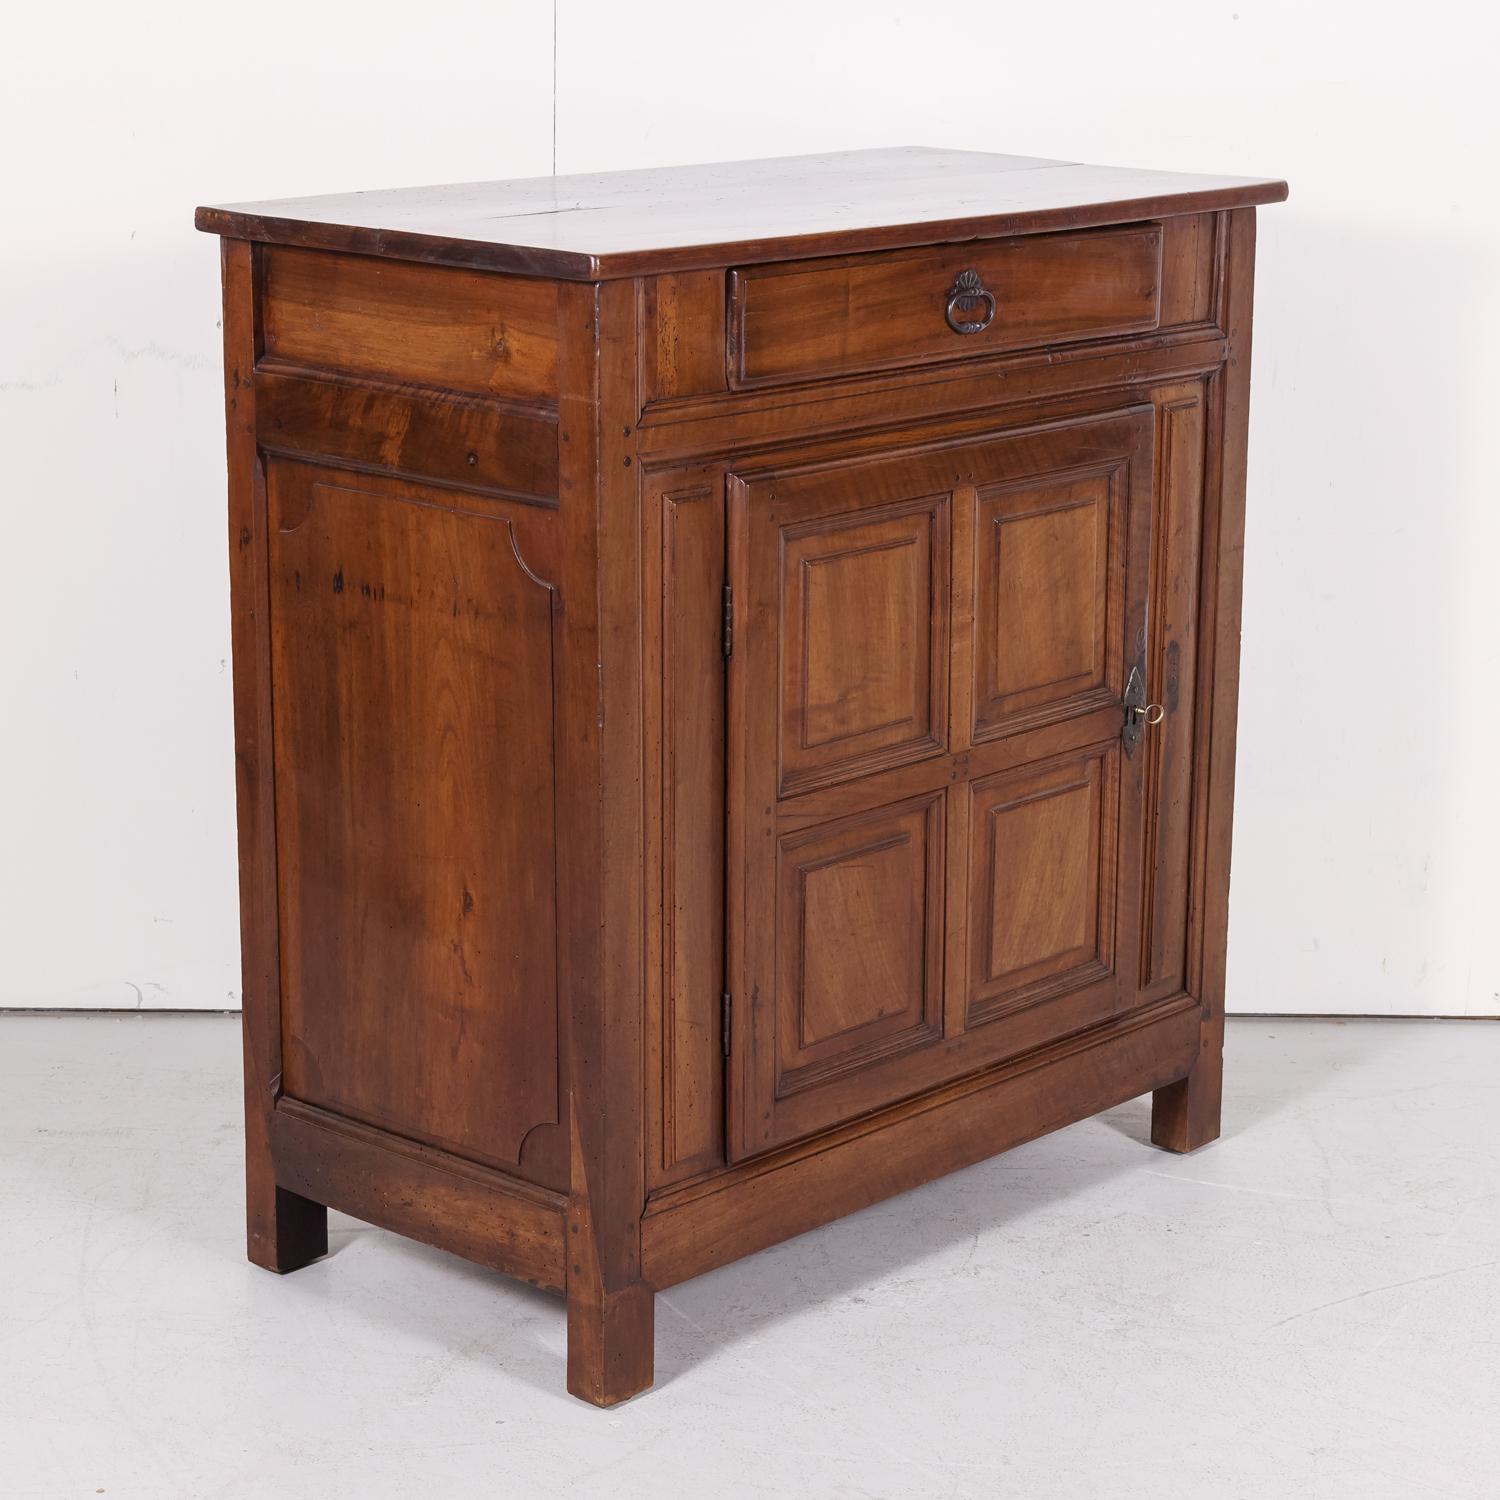 Early 19th century French Louis XIII style cabinet de confiture or jam cabinet handcrafted in Normandy of solid walnut with a rectangular top over a single drawer above a door having four raised panels that opens to reveal a single shelf, circa